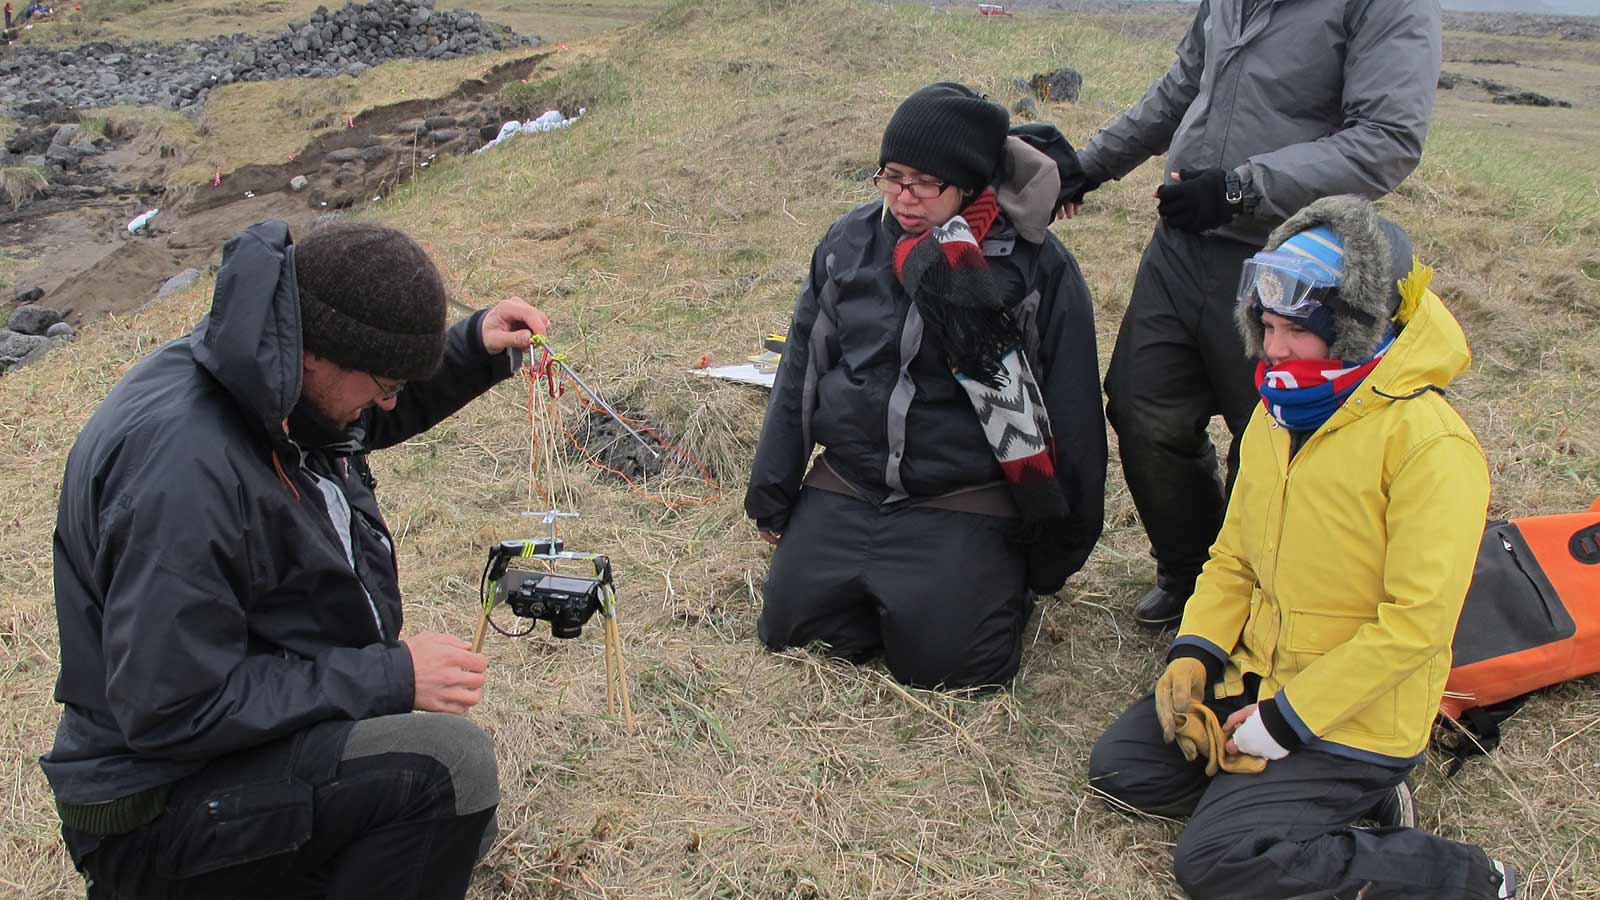 CUNY Undergrads being instructed in remote photography in Iceland.